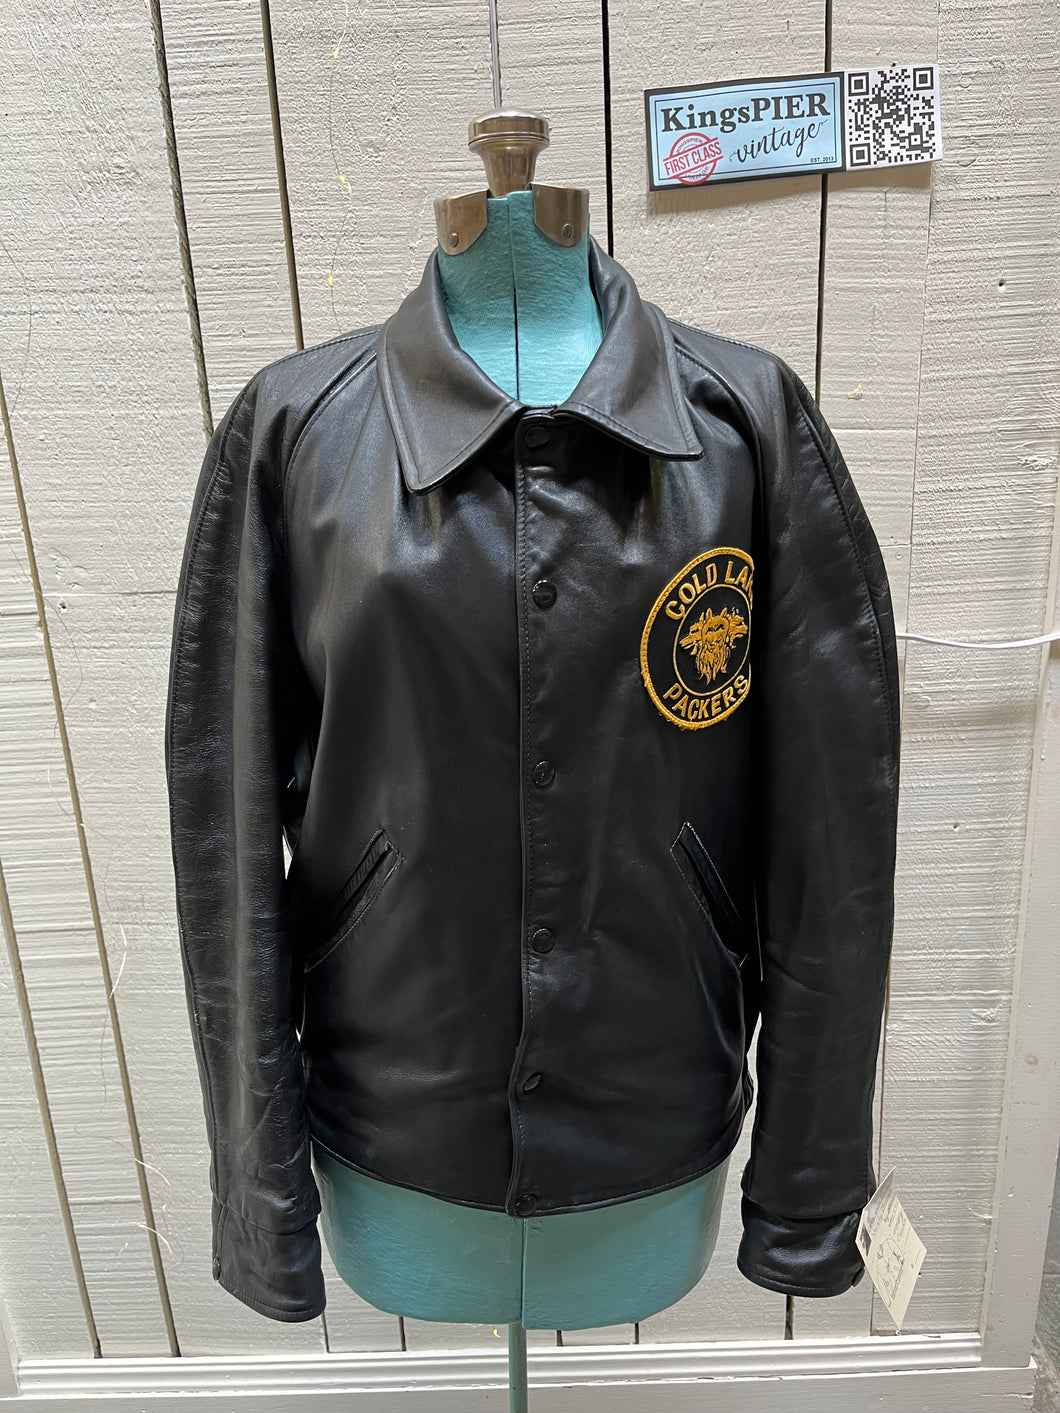 Vintage Cold Lake Packers Leather Varsity Jacket by Athletes Wear Co. LTD.

Jacket features embroidered detail on the chest, two front pockets and snap closures.

Made in Canada.
Chest 46”.